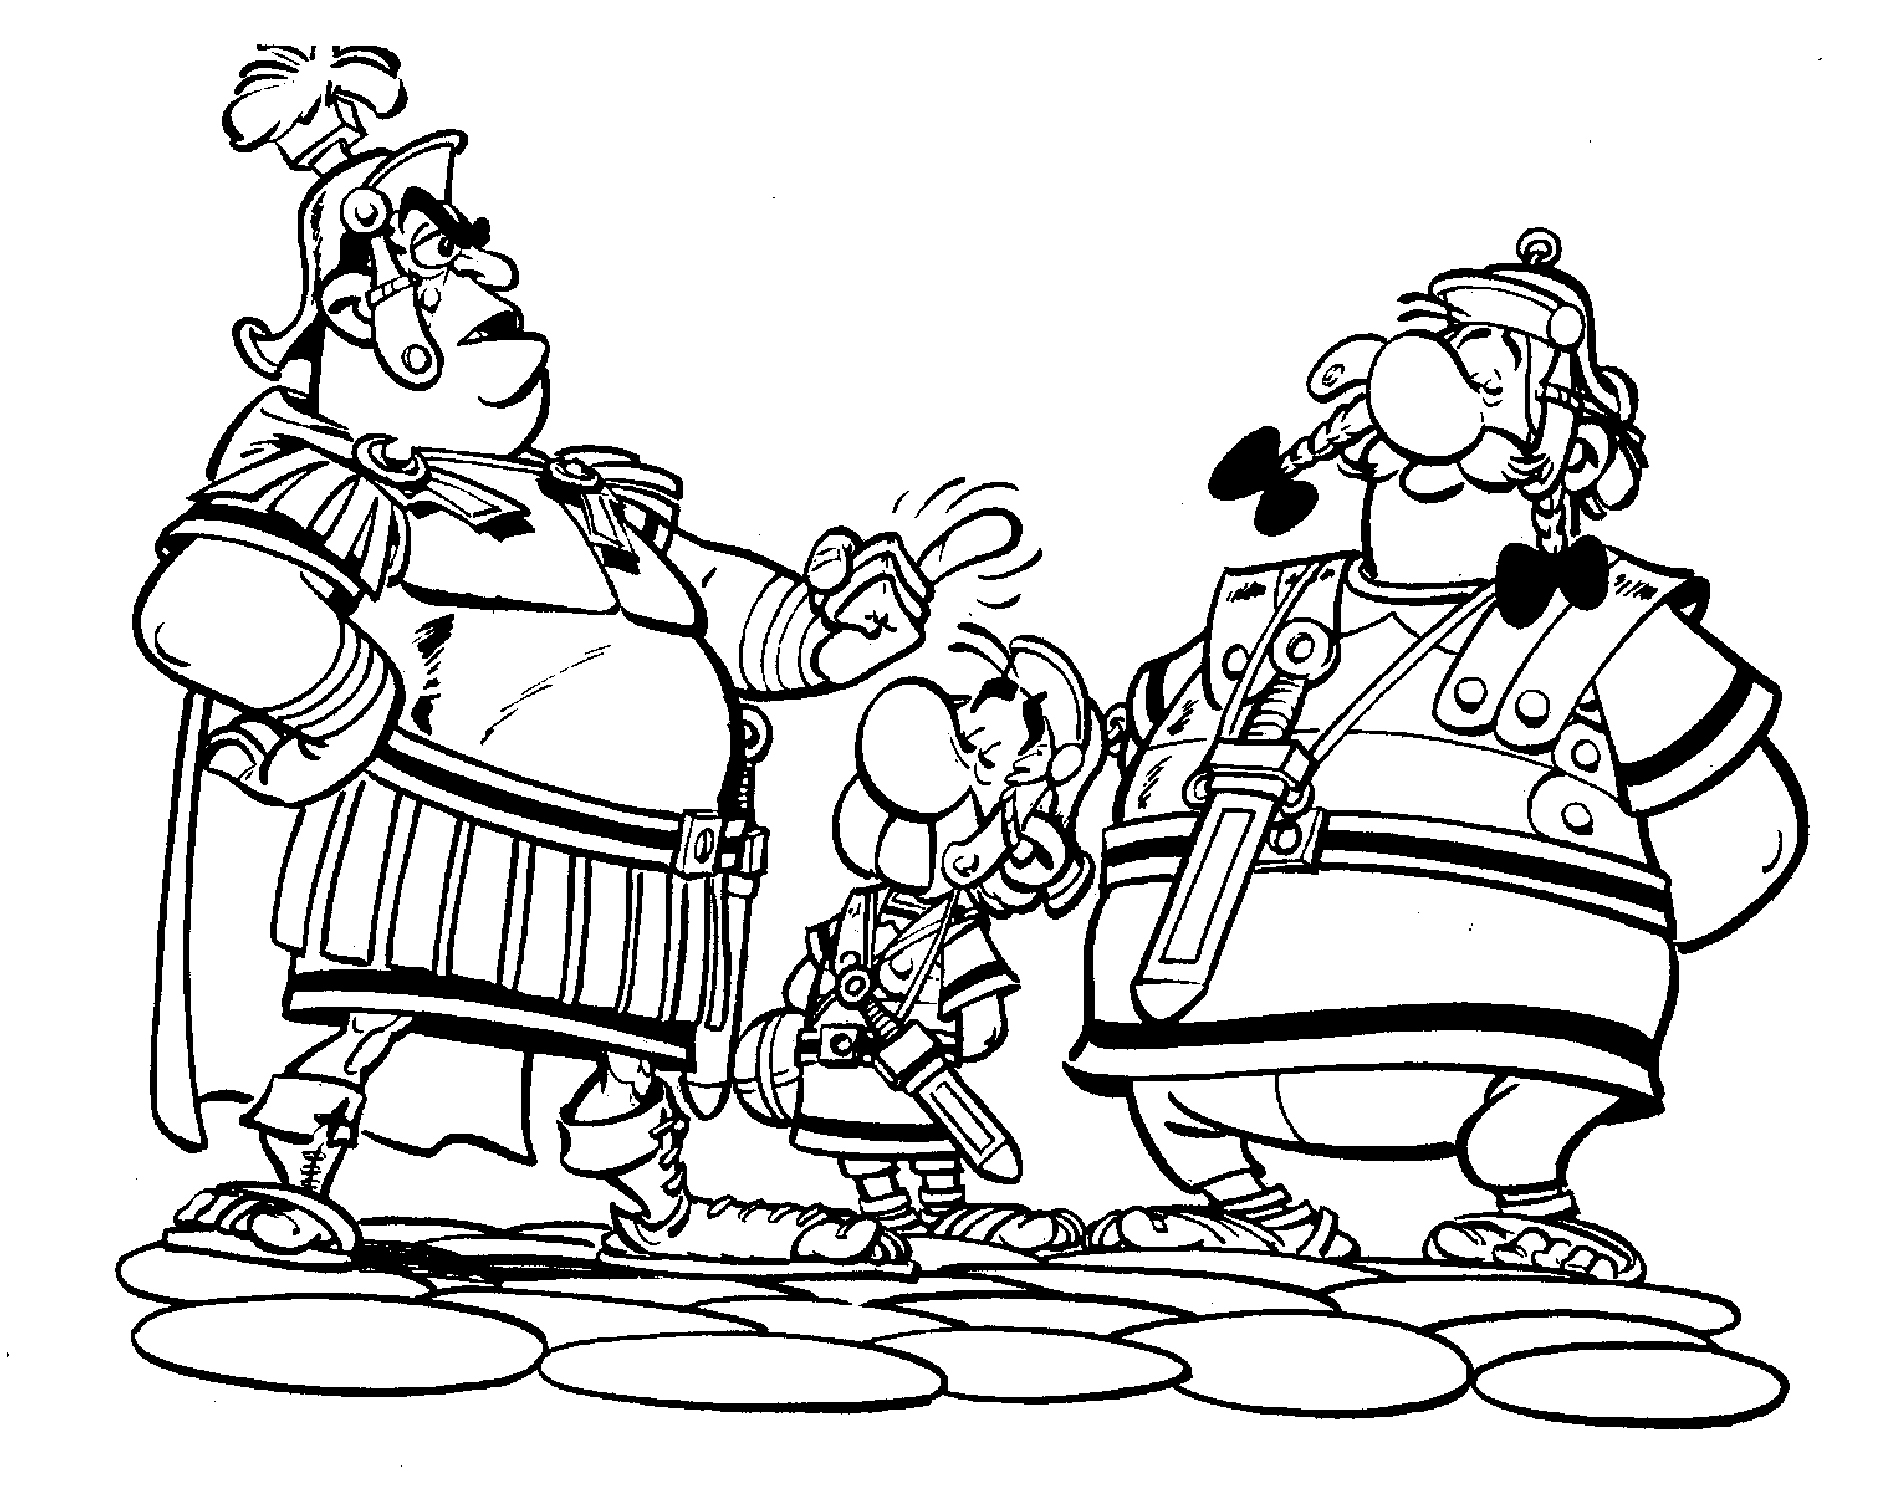 Coloring Page - Asterix and obelix coloring pages 3